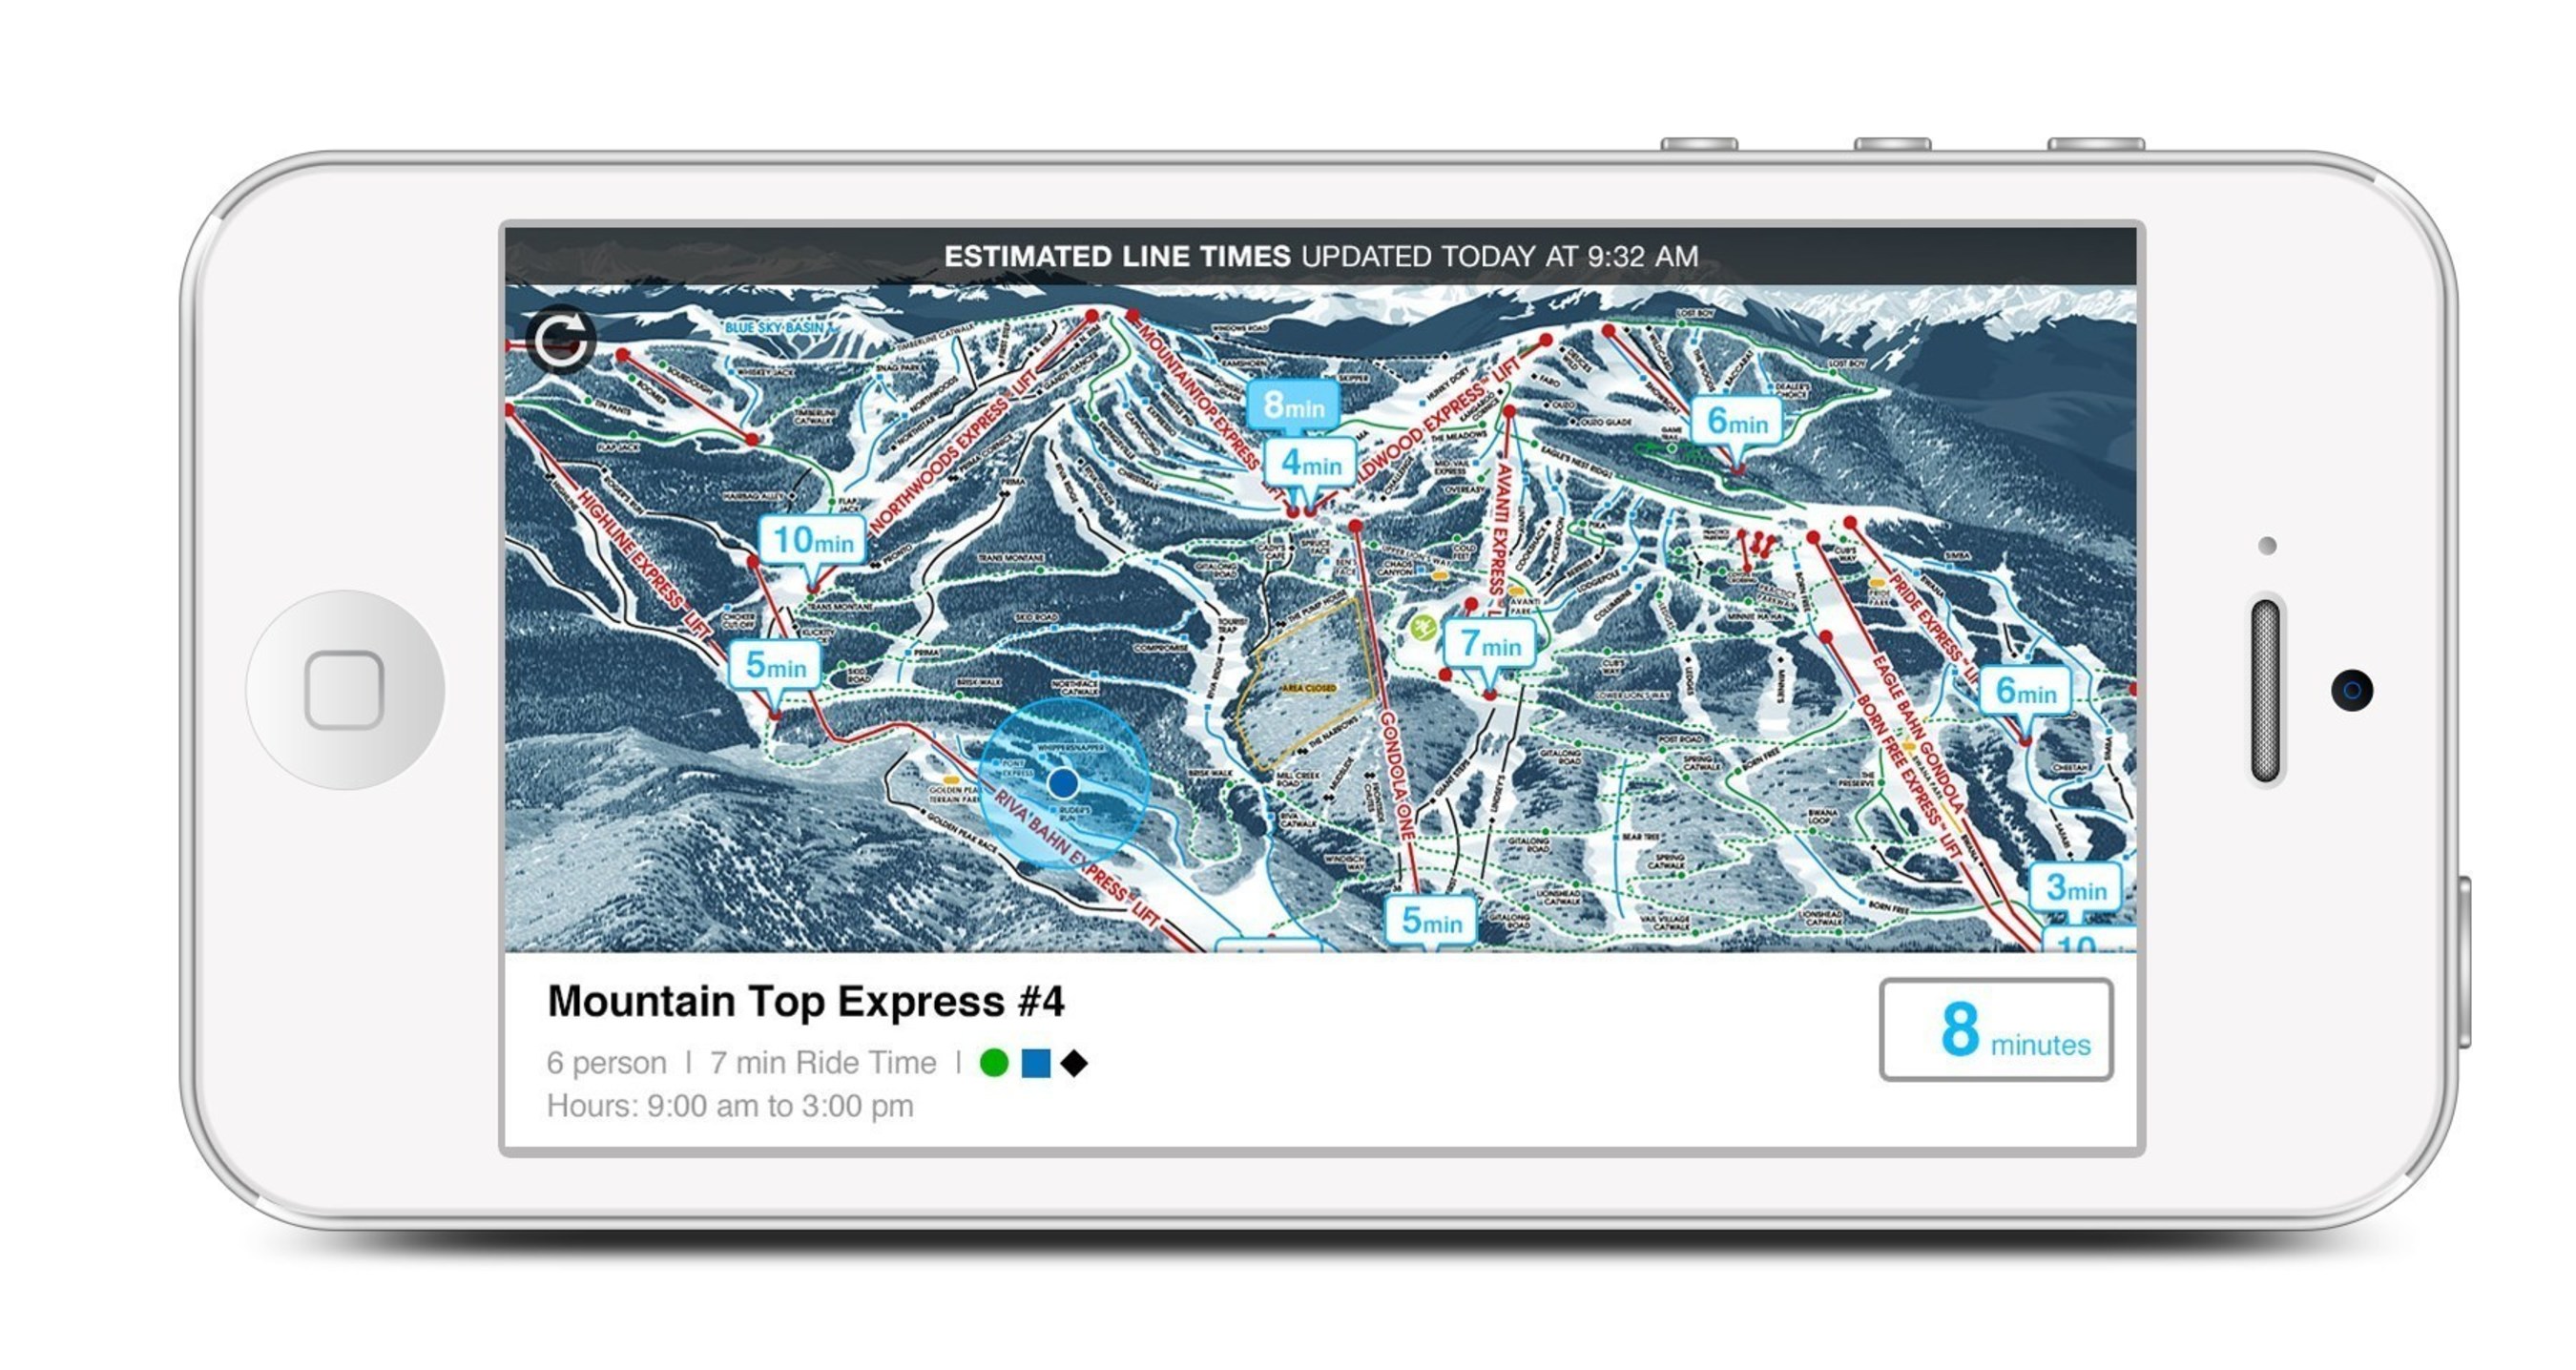 Vail Resorts' EpicMix Time is Now Live and Will Give Guests Access to Real-Time Lift Line Wait Times